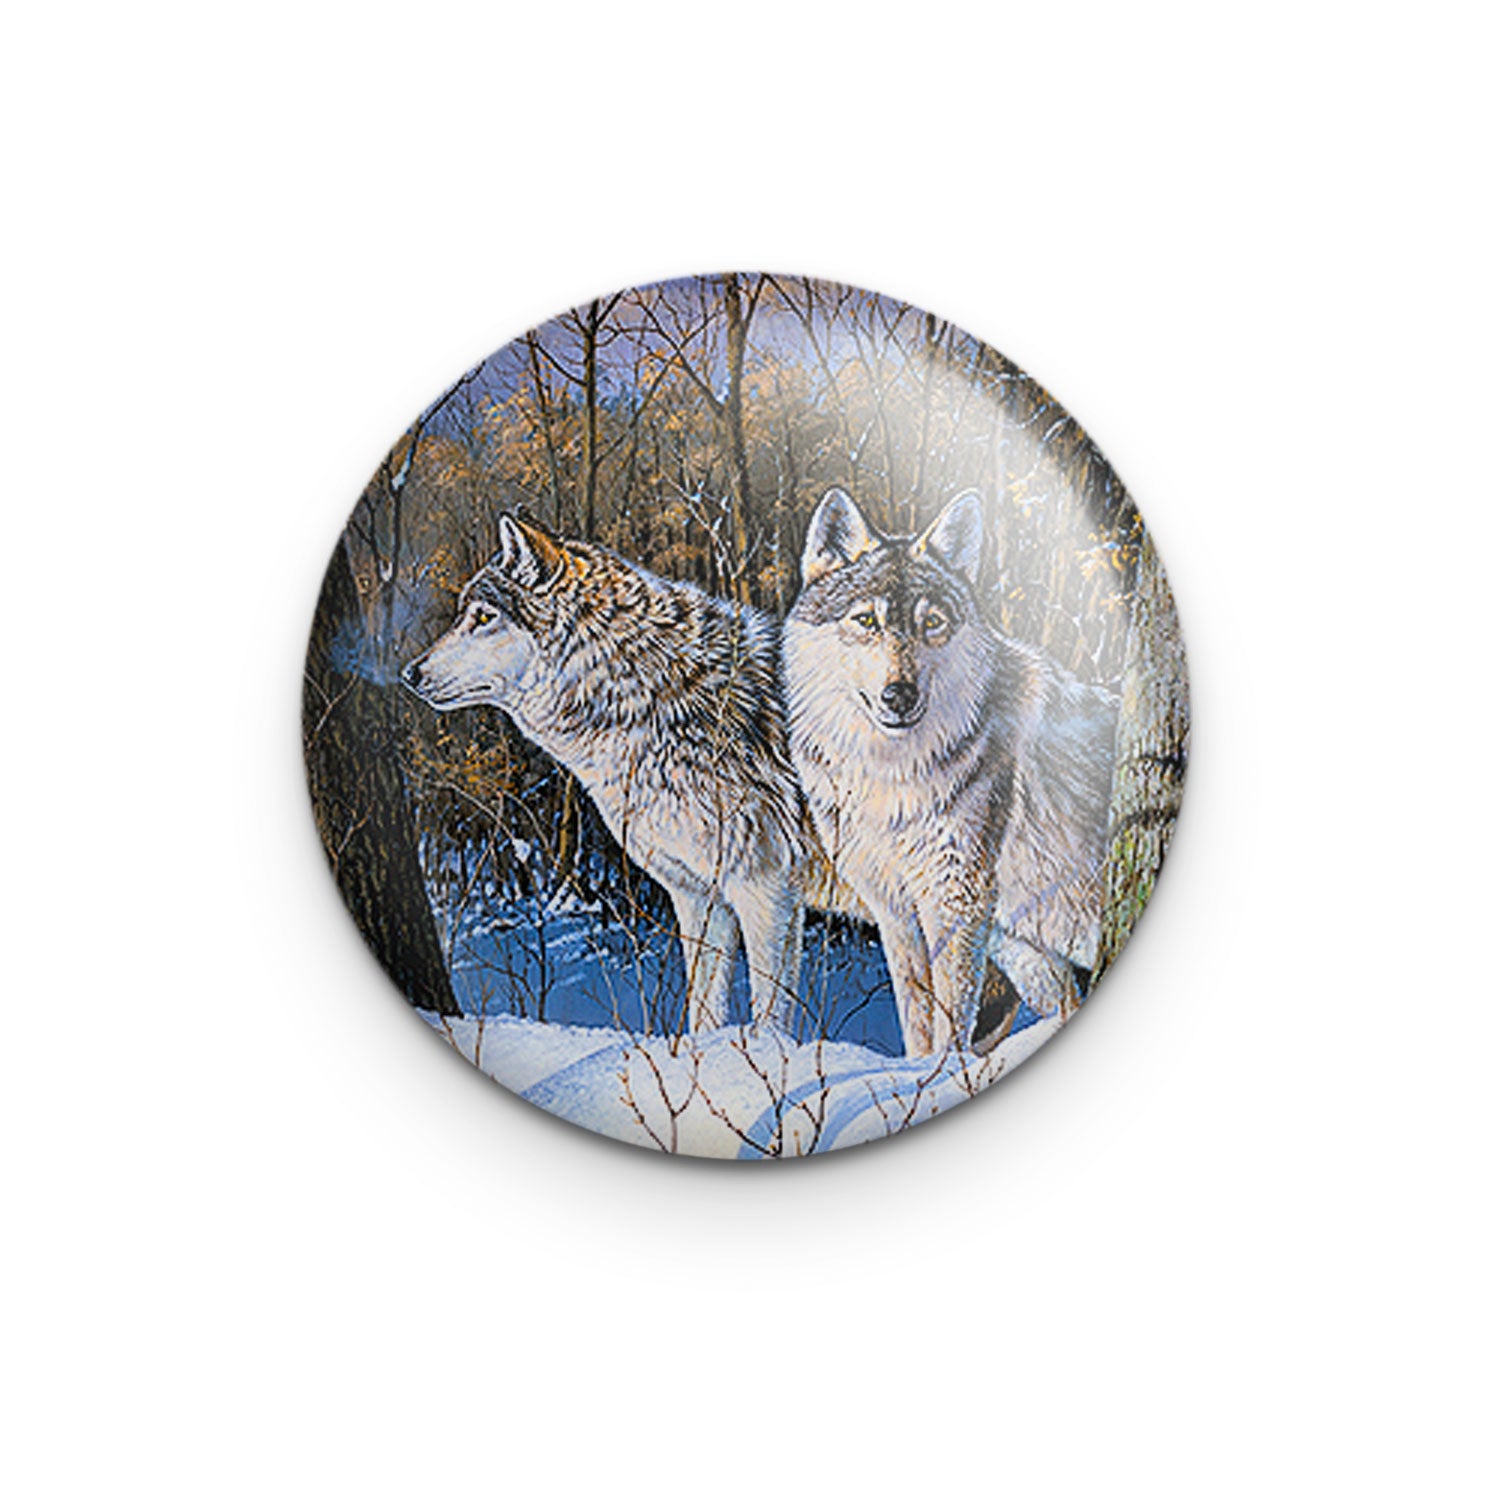 "Silent Trackers" - 1" Round Pinback Button